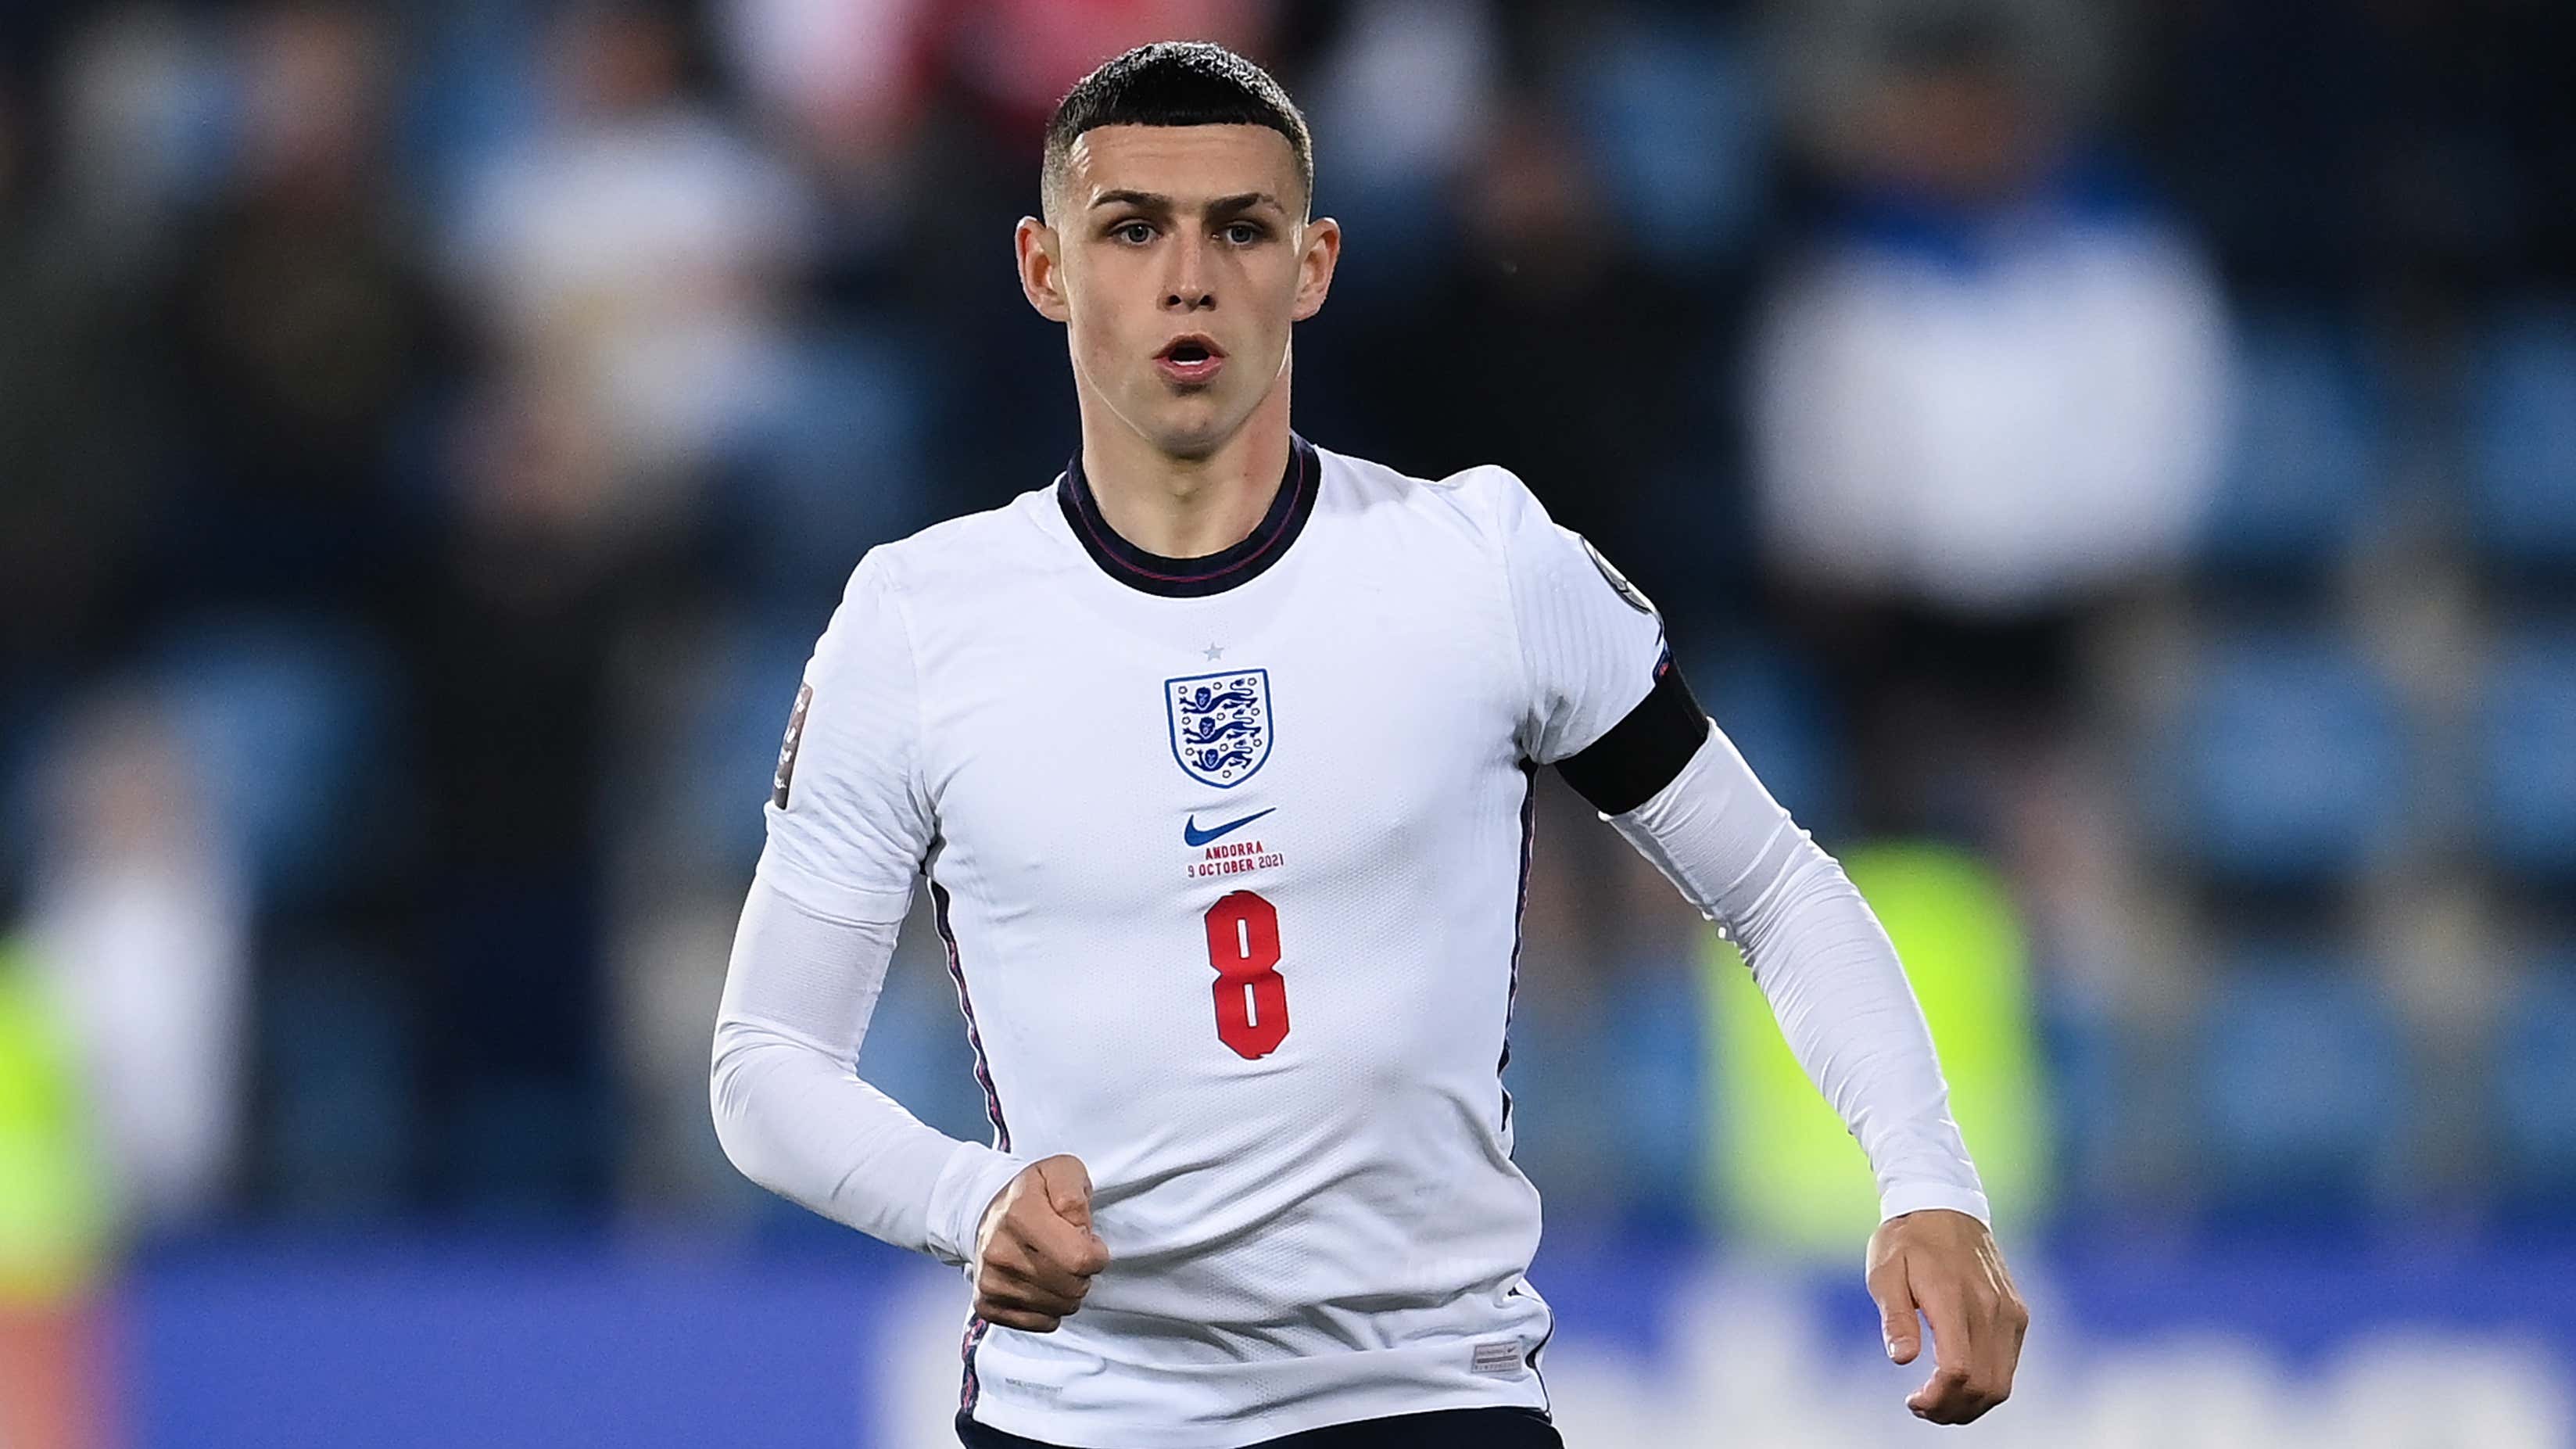 Foden is not just the future for England and Man City - he is a star right now